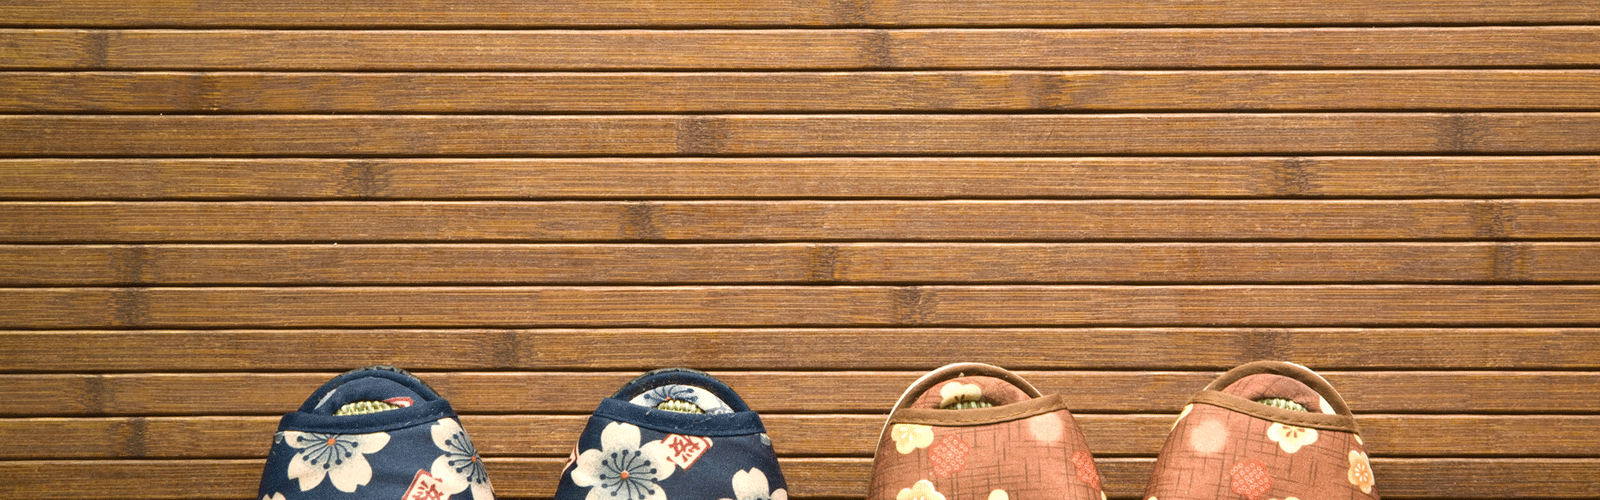 Japan Home Search: Slippers and Hardwood